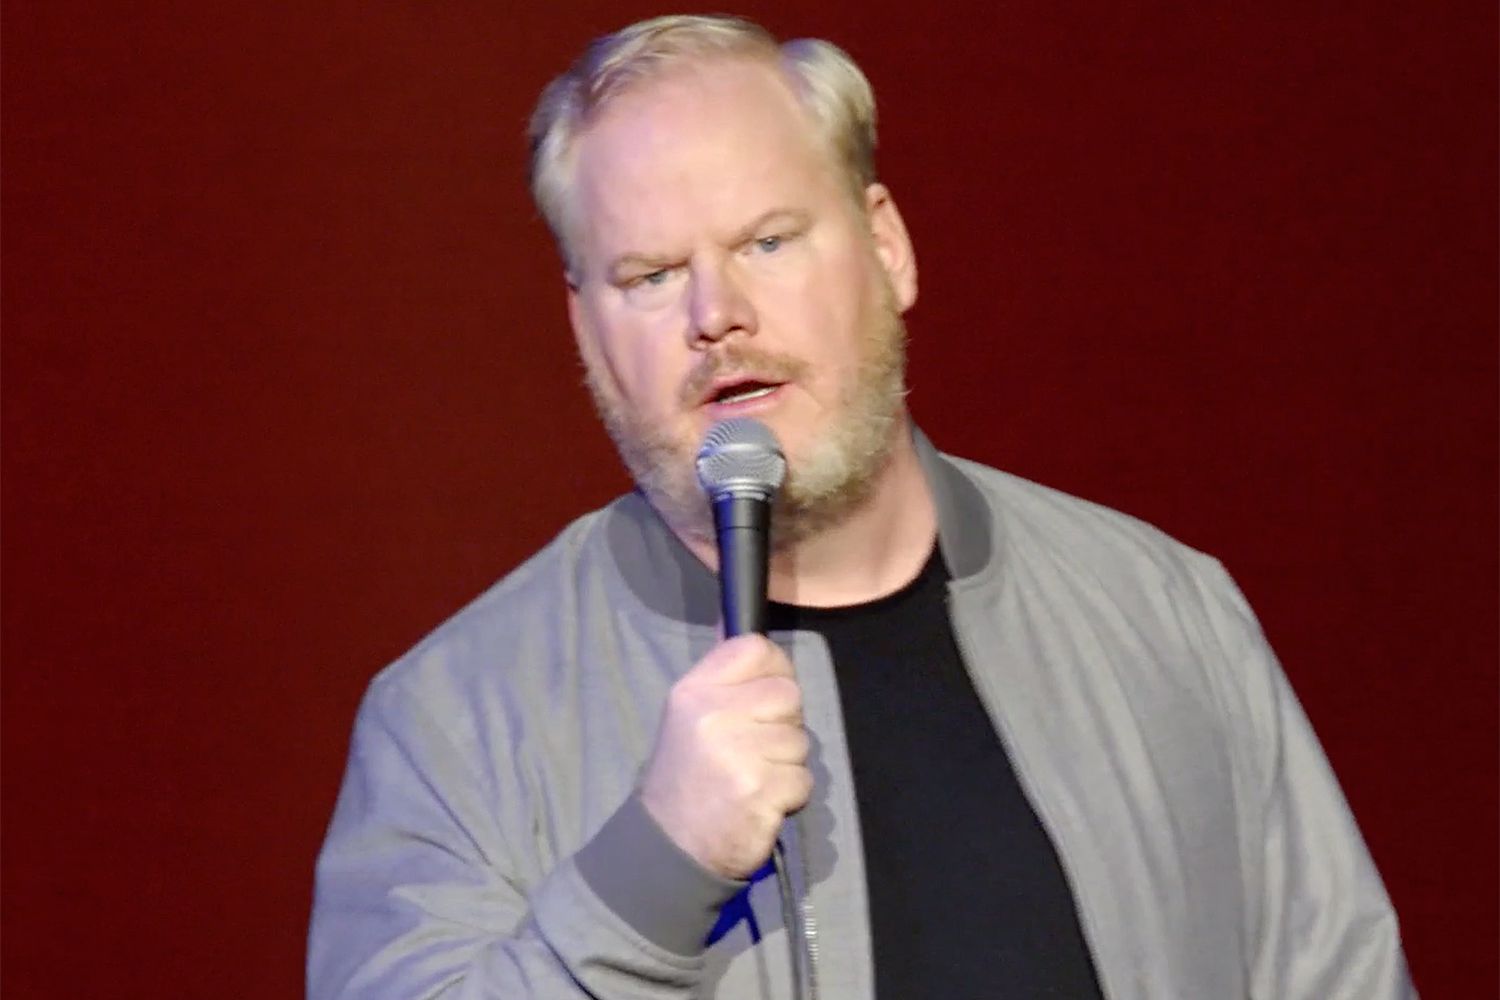 Jim Gaffigan's first trailer for new Amazon comedy special